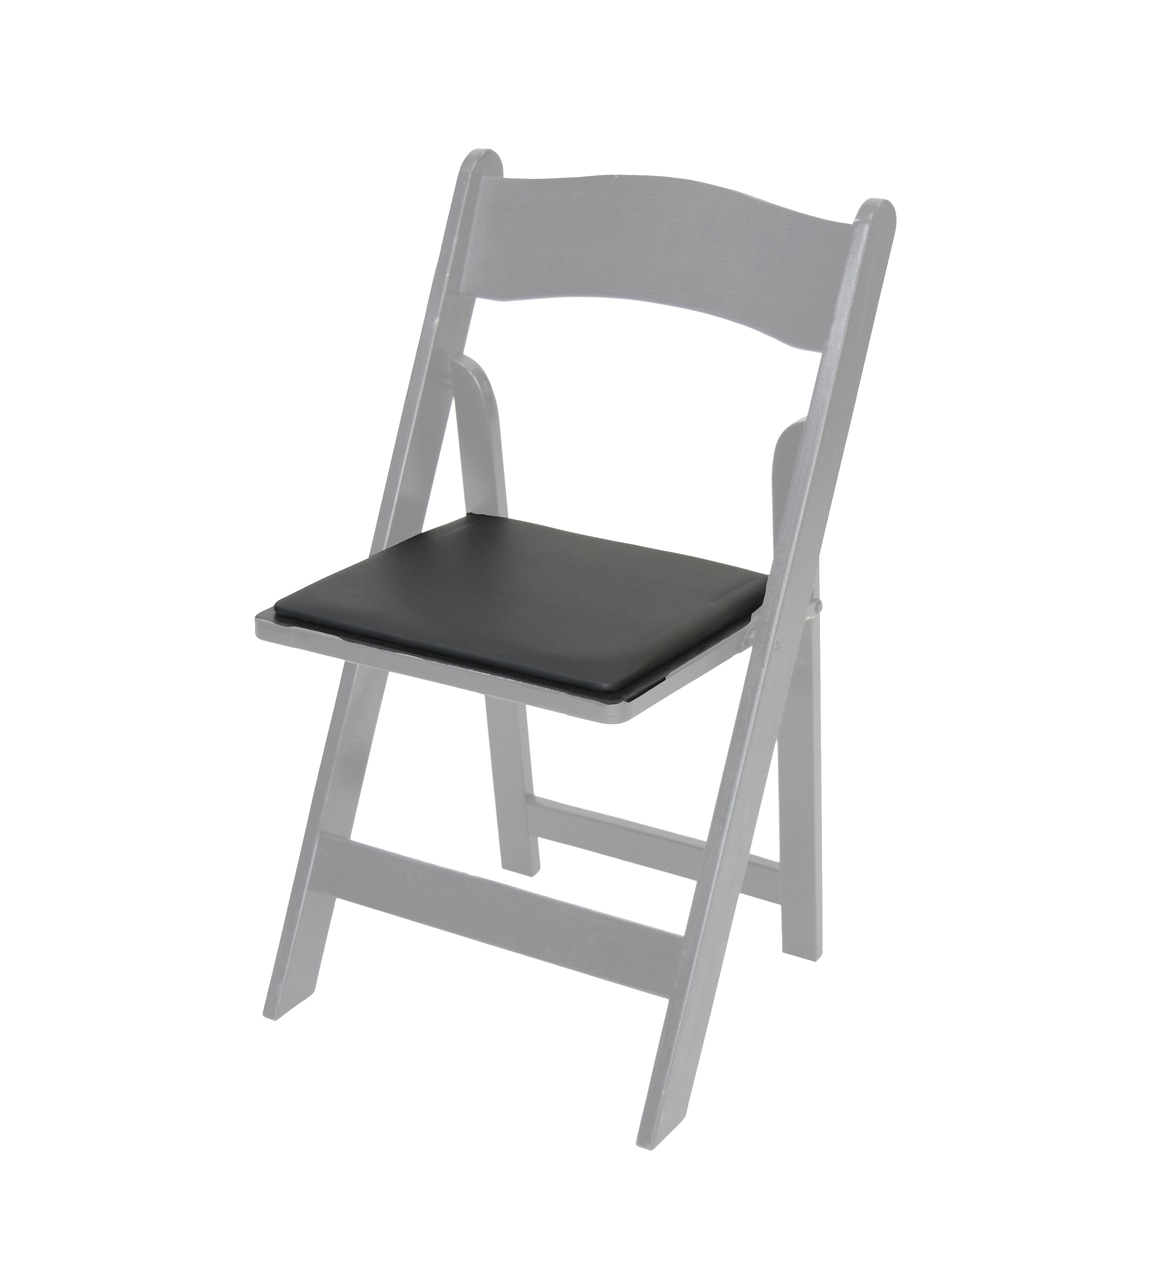 replacement vinyl seat pad for wood folding chairs